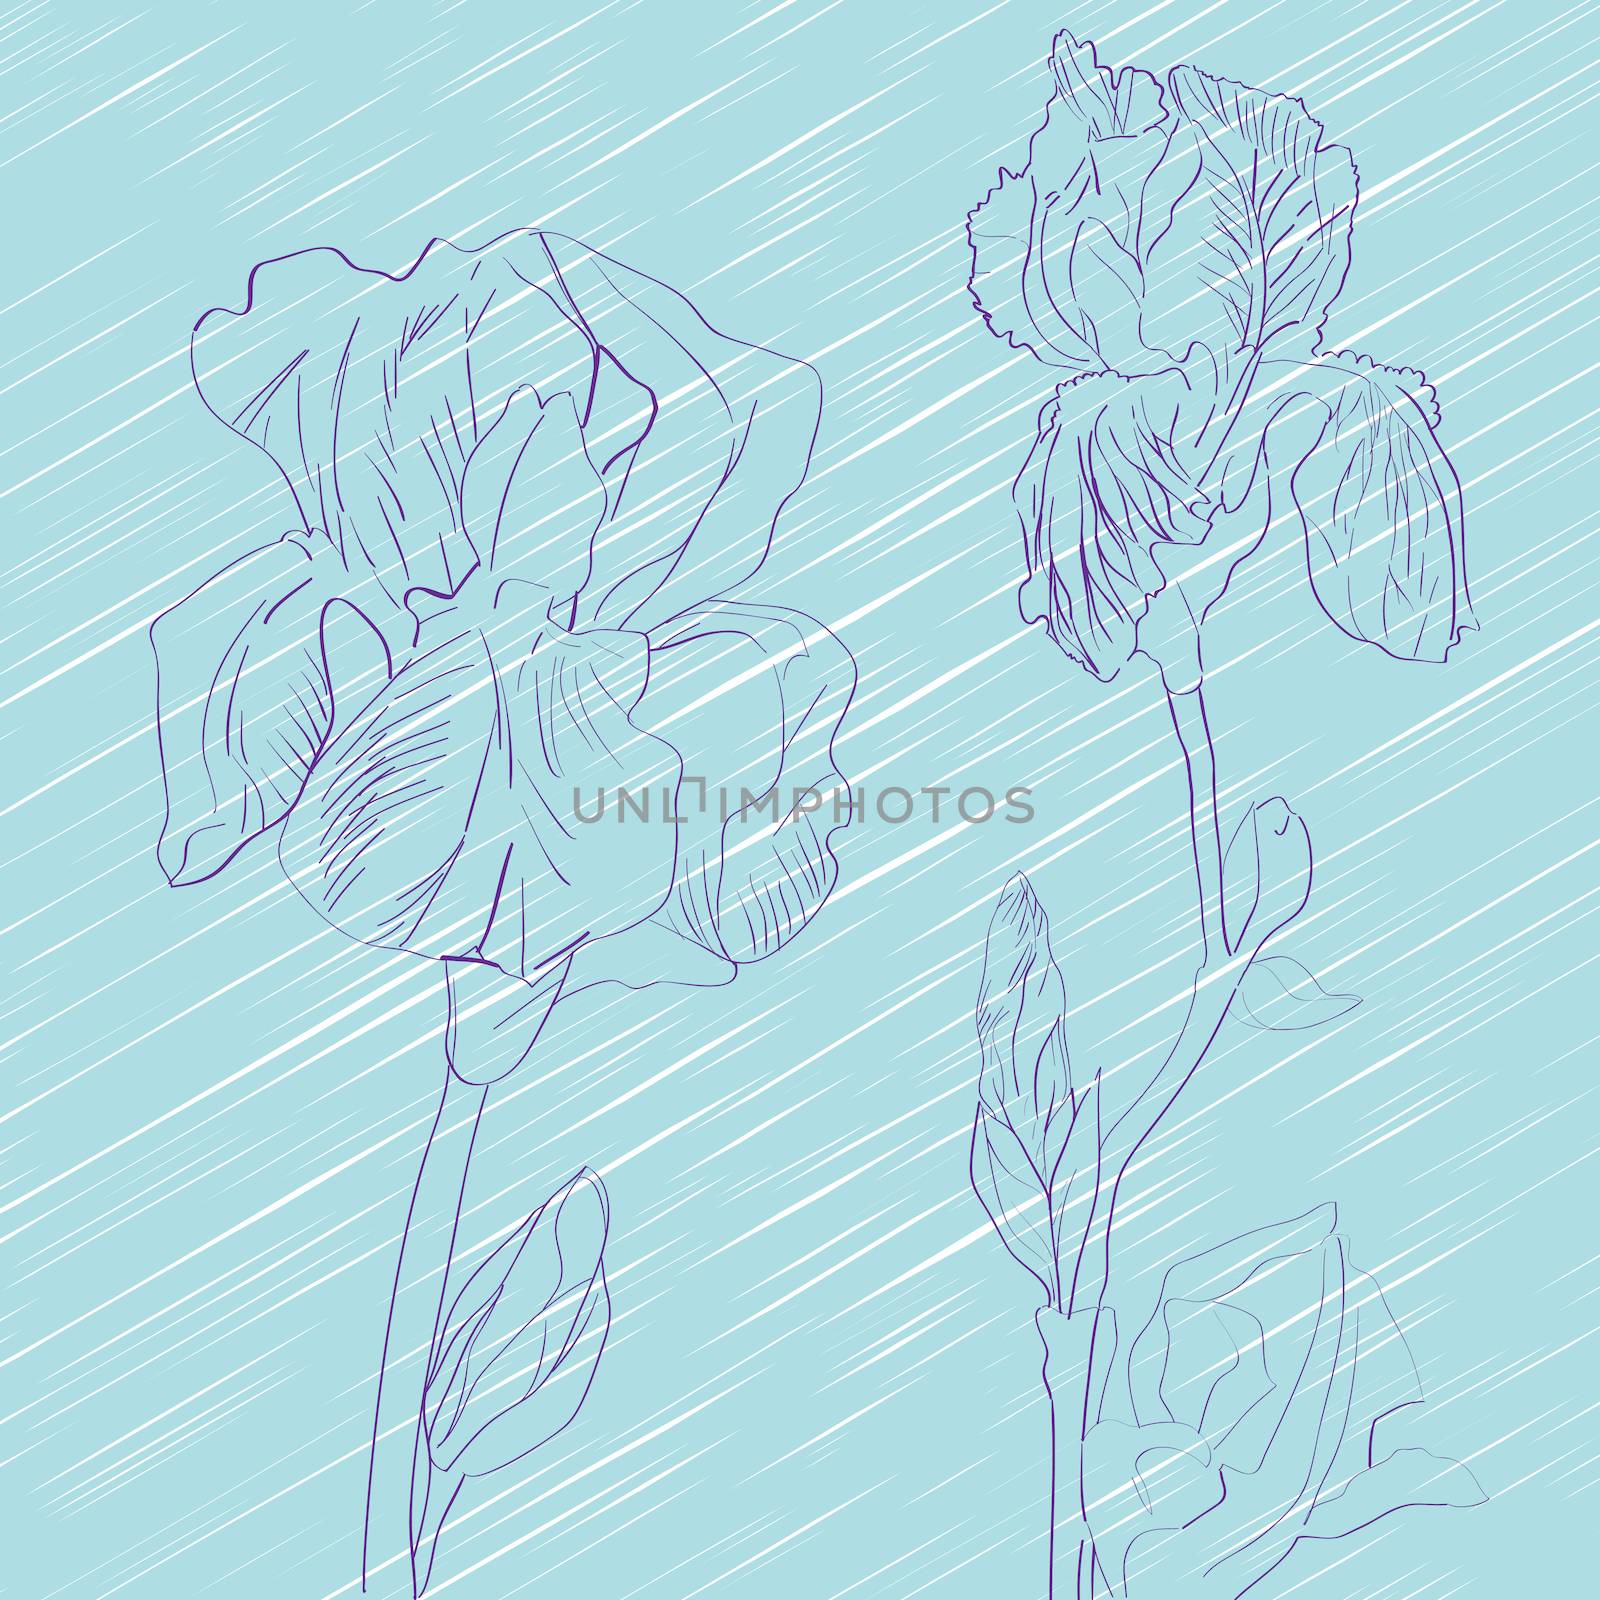 Hand drawn sketch composition with irises over a blue background, greeting card or ceramic tile